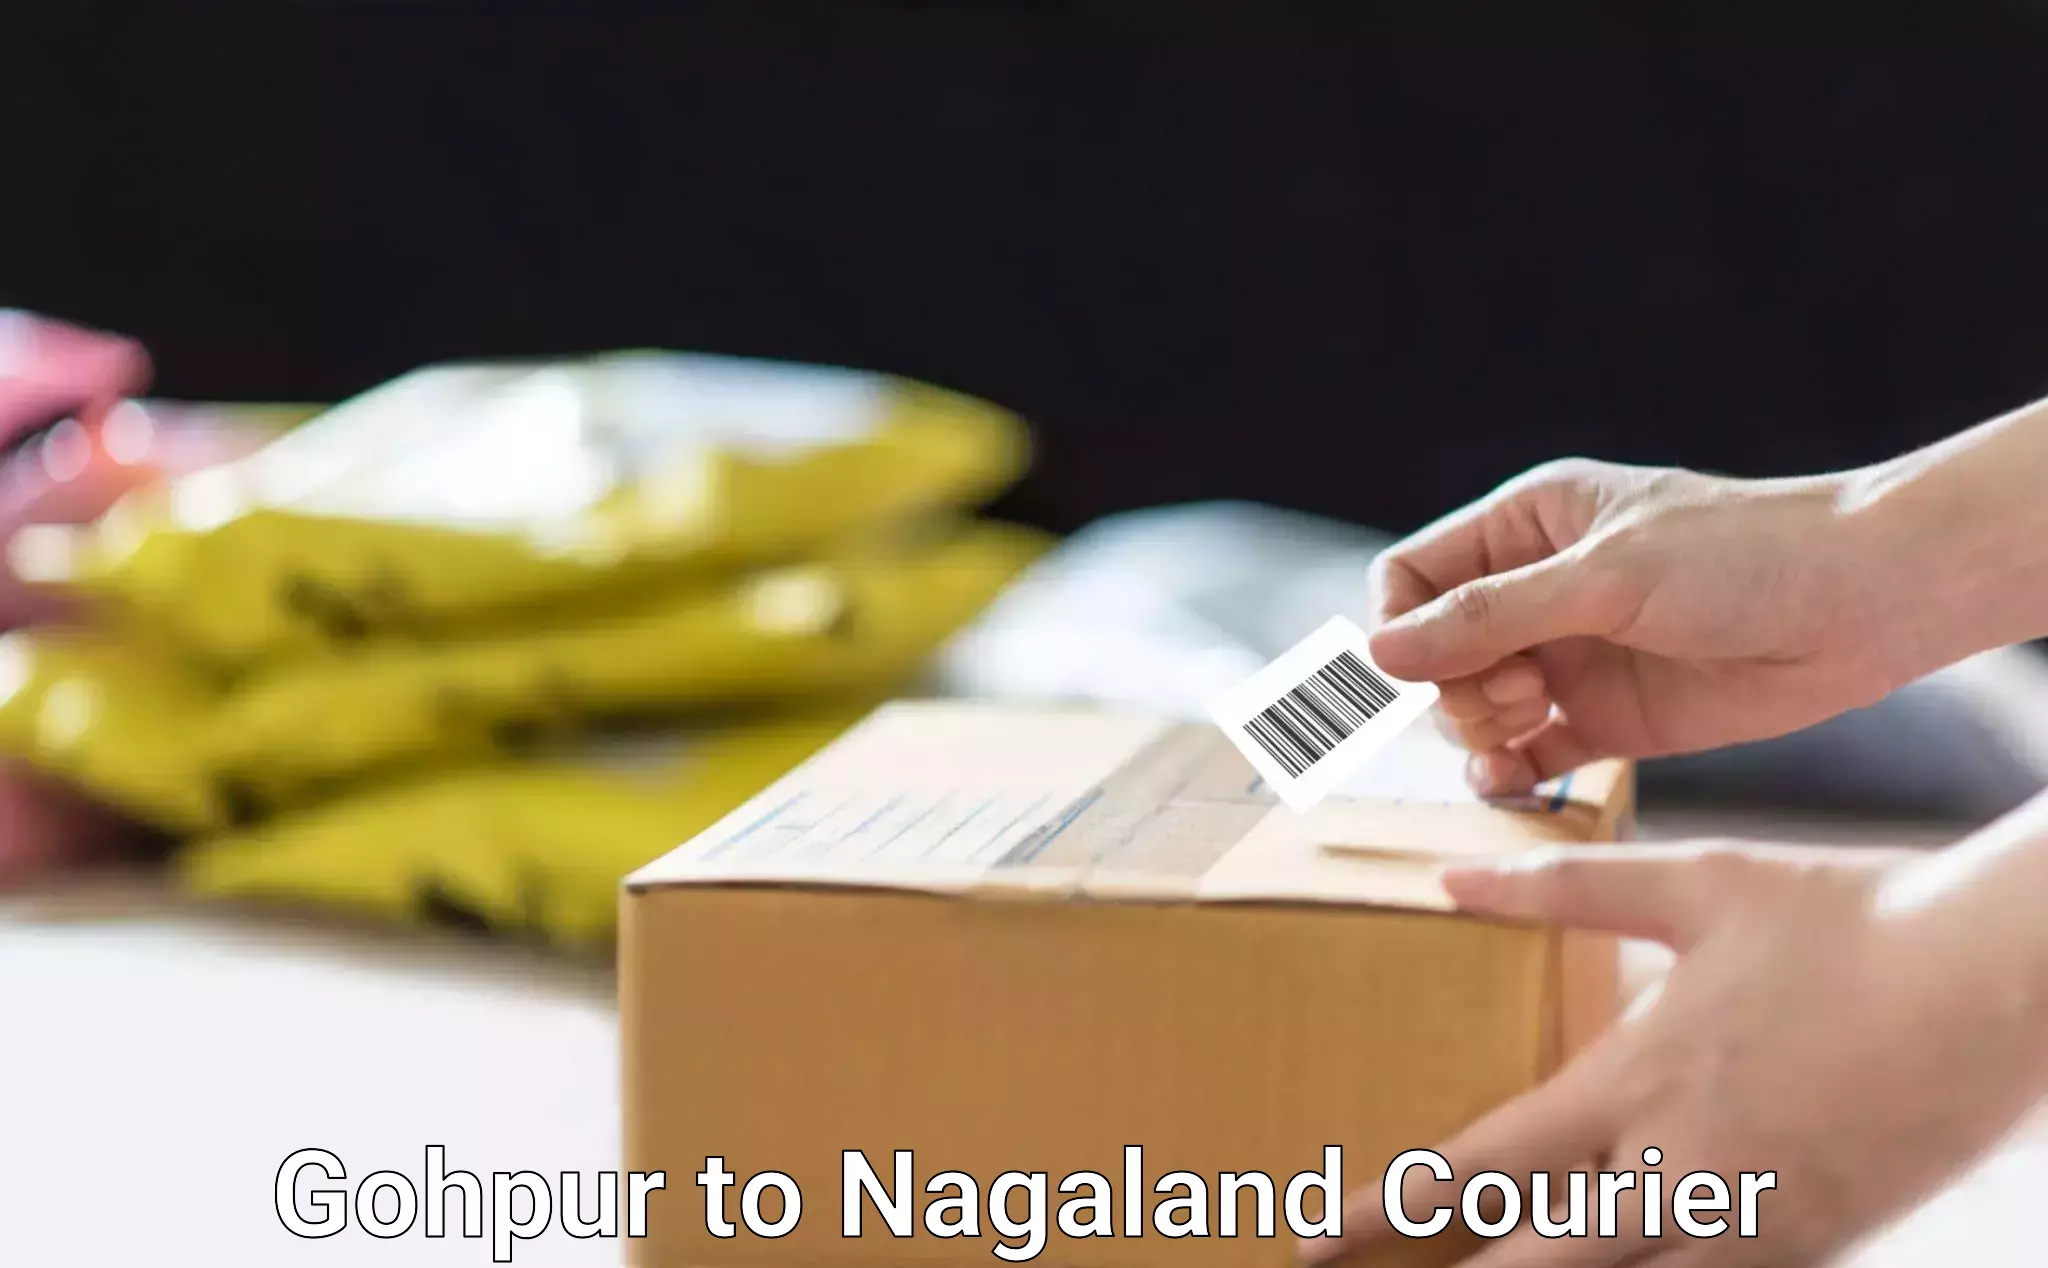 Easy access courier services in Gohpur to Nagaland